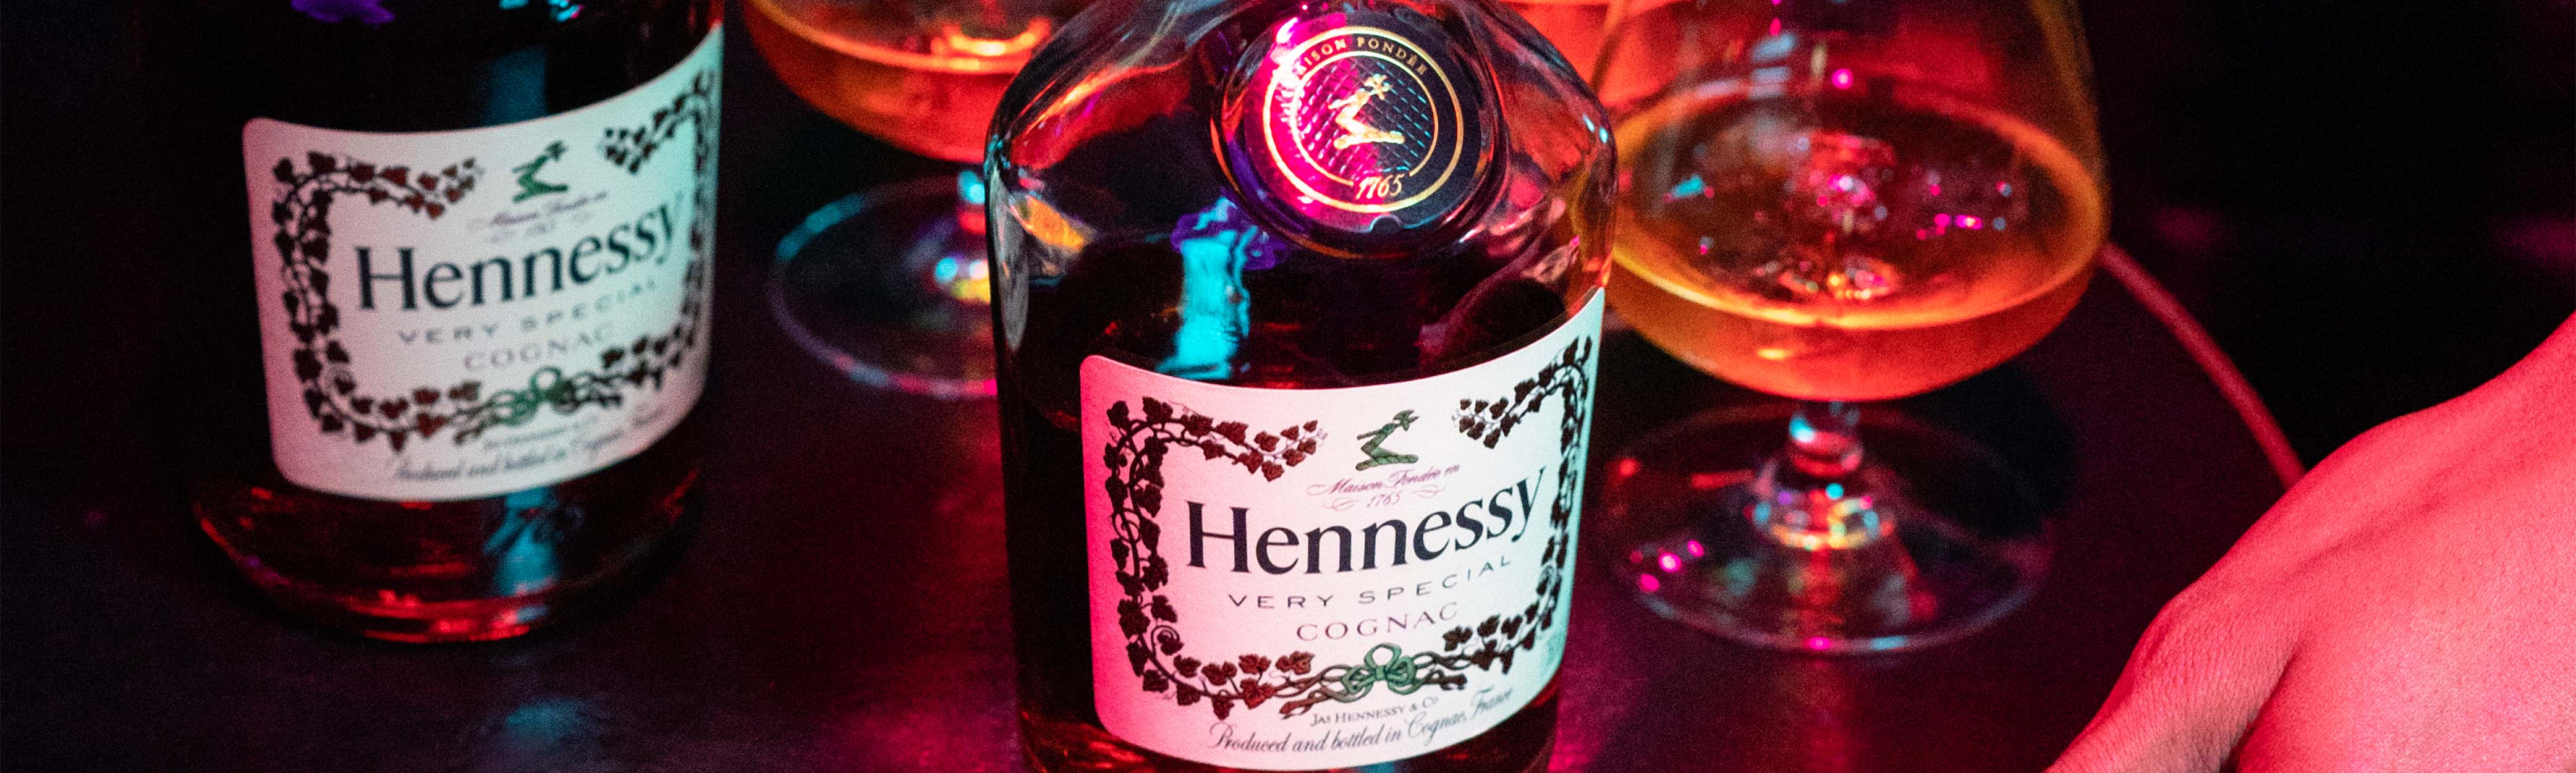 Hennessy Cognac | The Bottle Club